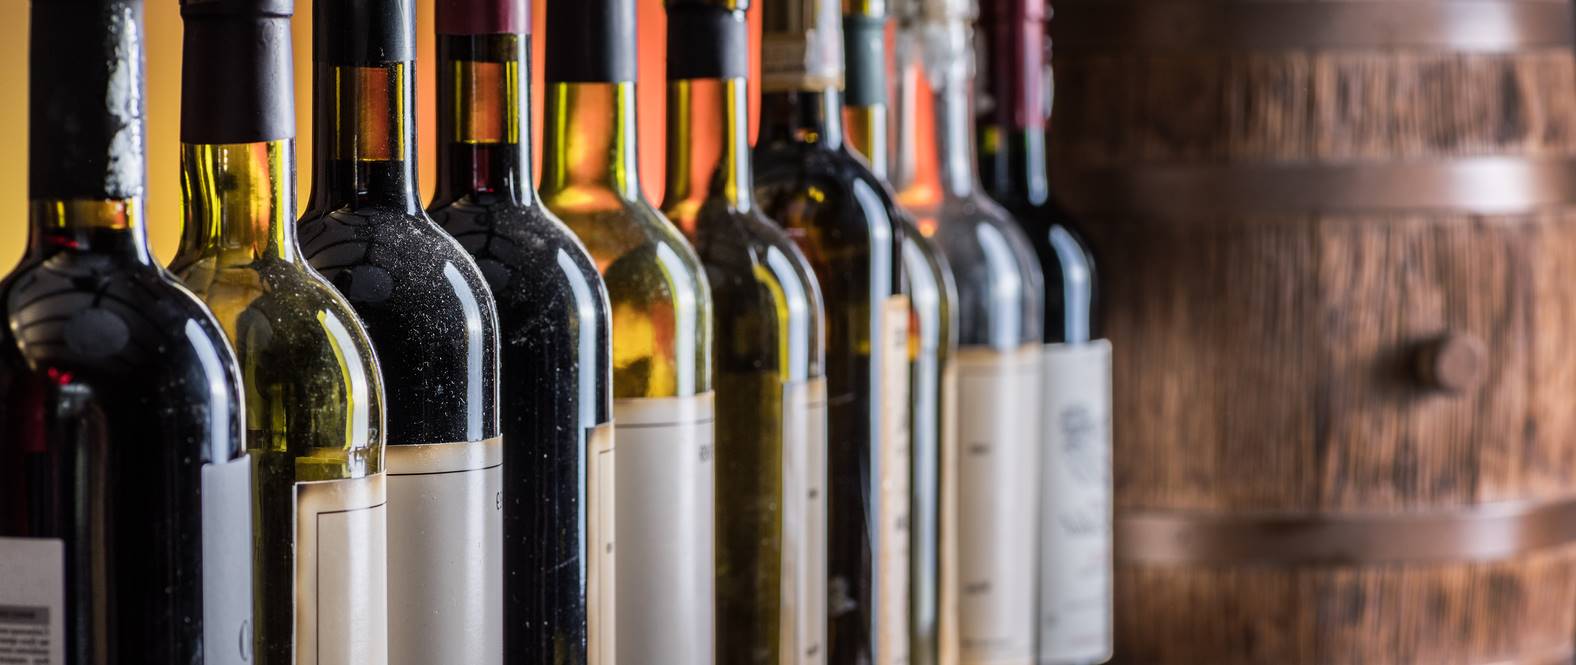 The wine industry contributes R36 billion to South Africa’s gross domestic product. Picture: iStock/Gallo Images